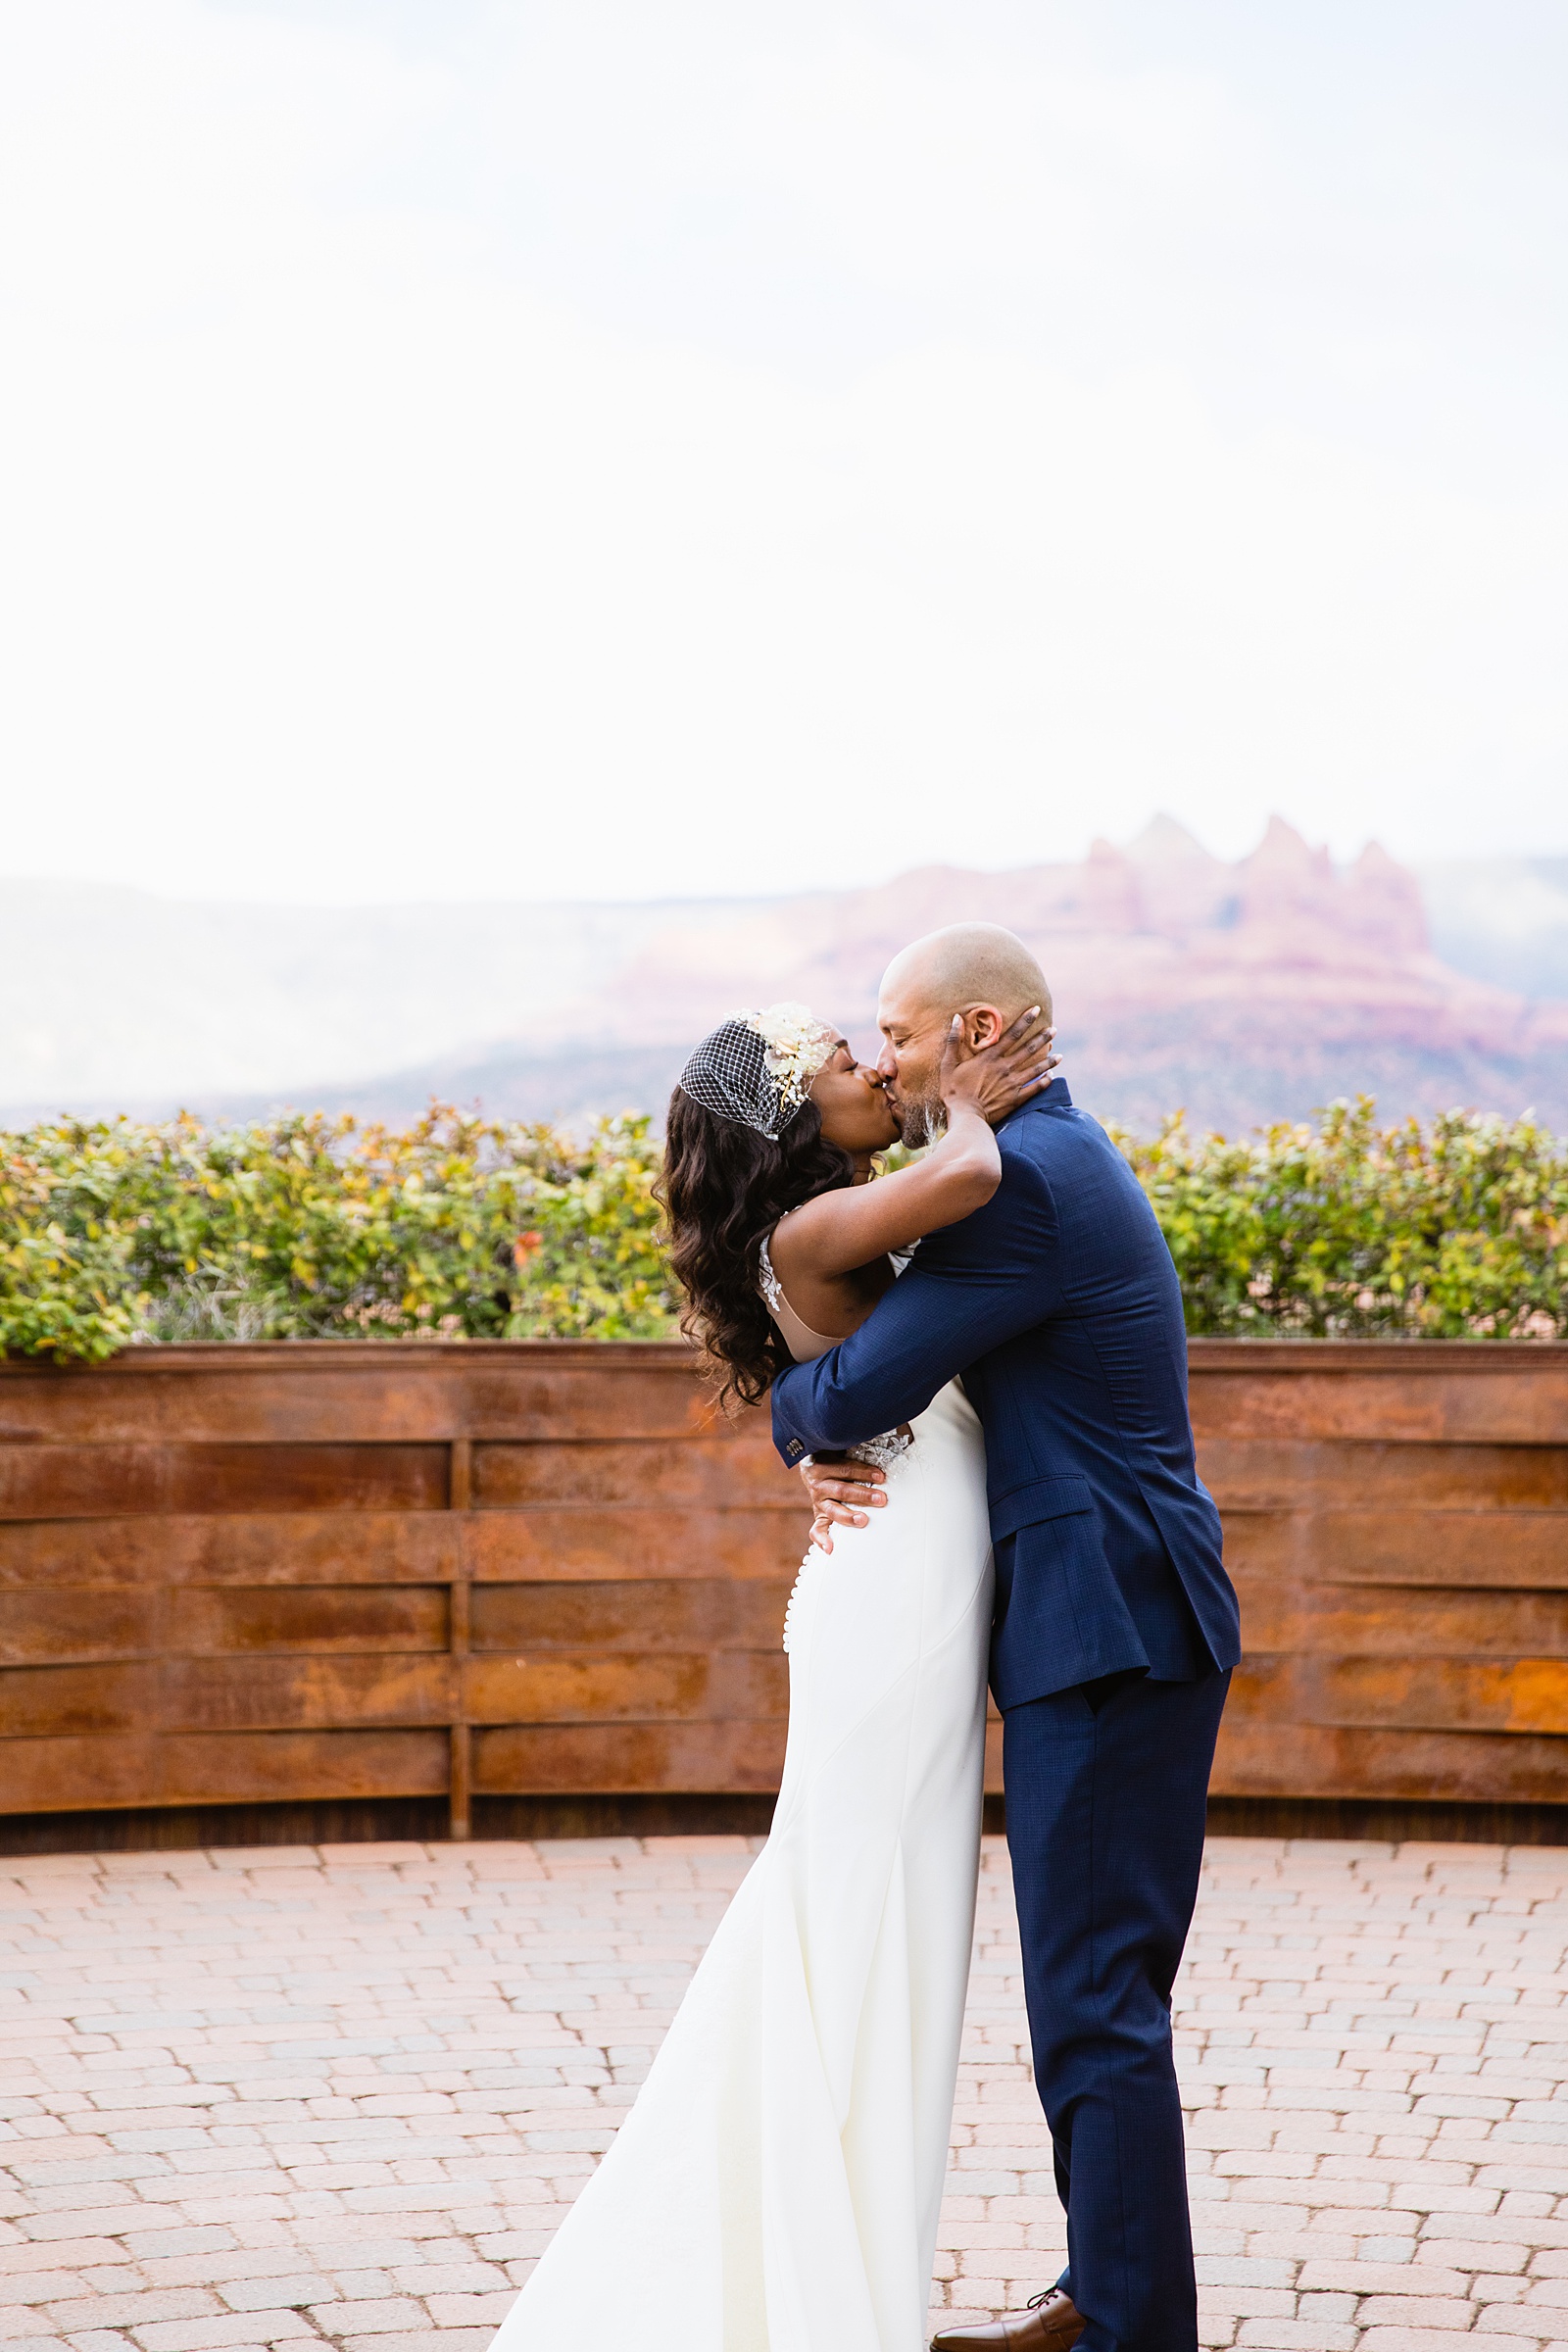 Bride and Groom share their first kiss during their wedding ceremony at Agave of Sedona by Arizona wedding photographer PMA Photography.